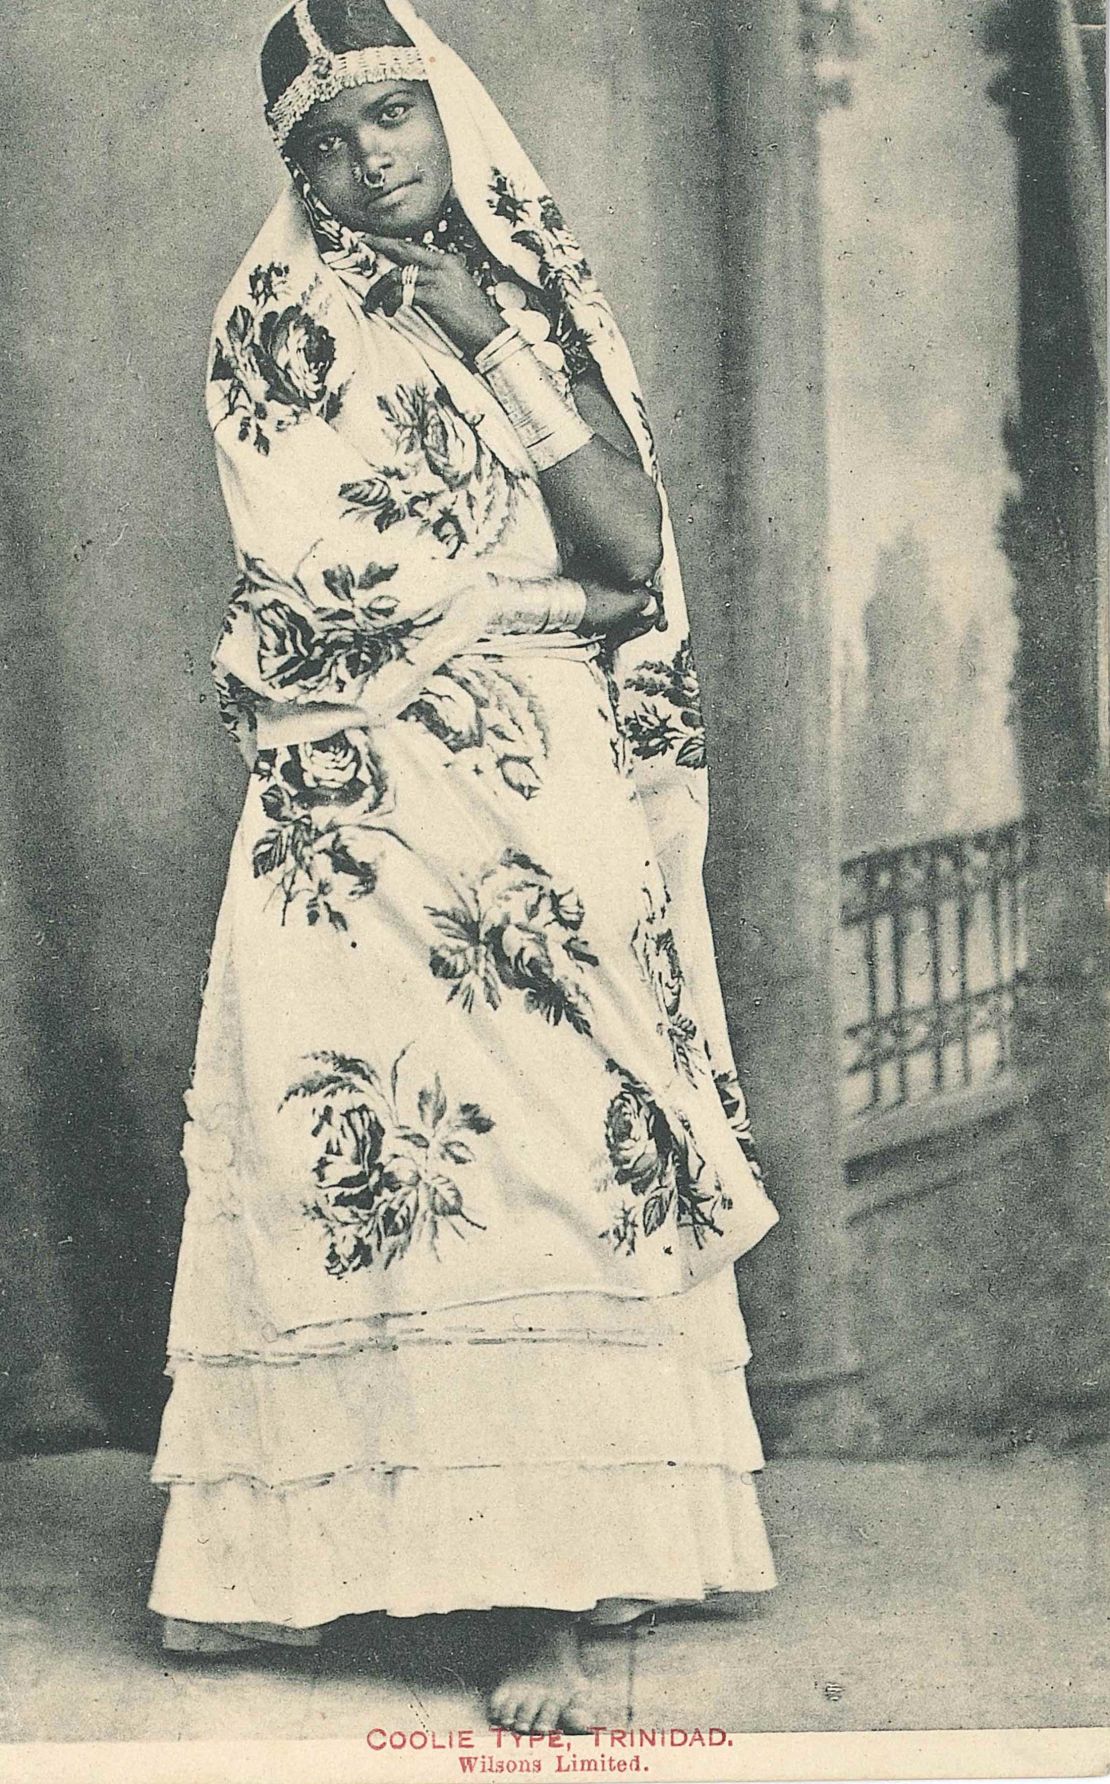 Rare postcards give a glimpse at the 19th-century Indo-Caribbean women who signed contracts as indentured laborers. Tourists collected these images as evidence of their worldliness.